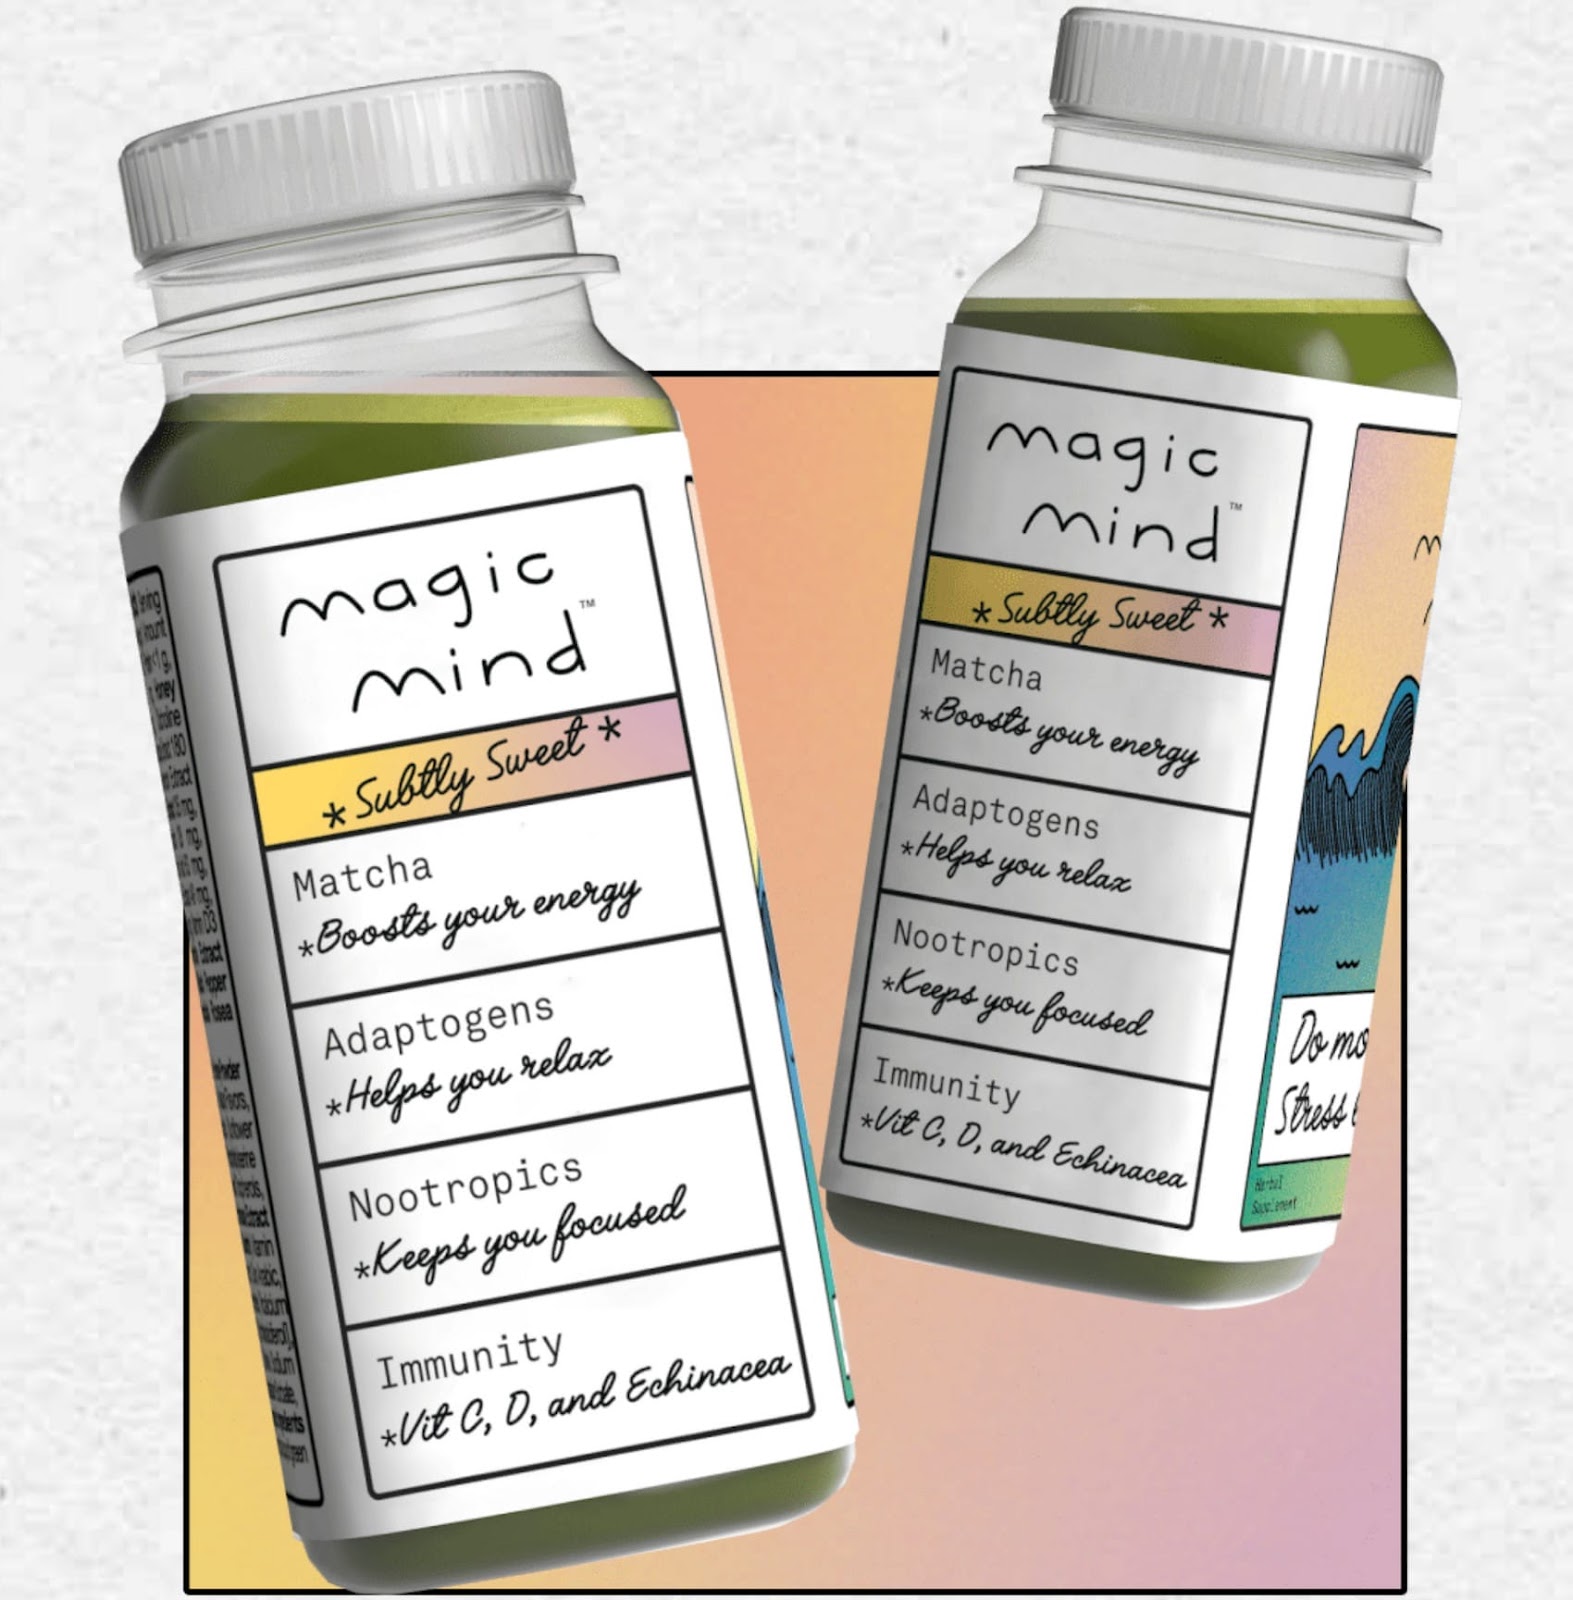 Two bottles of Magic Mind productivity shot with labels and text about the product's benefits.